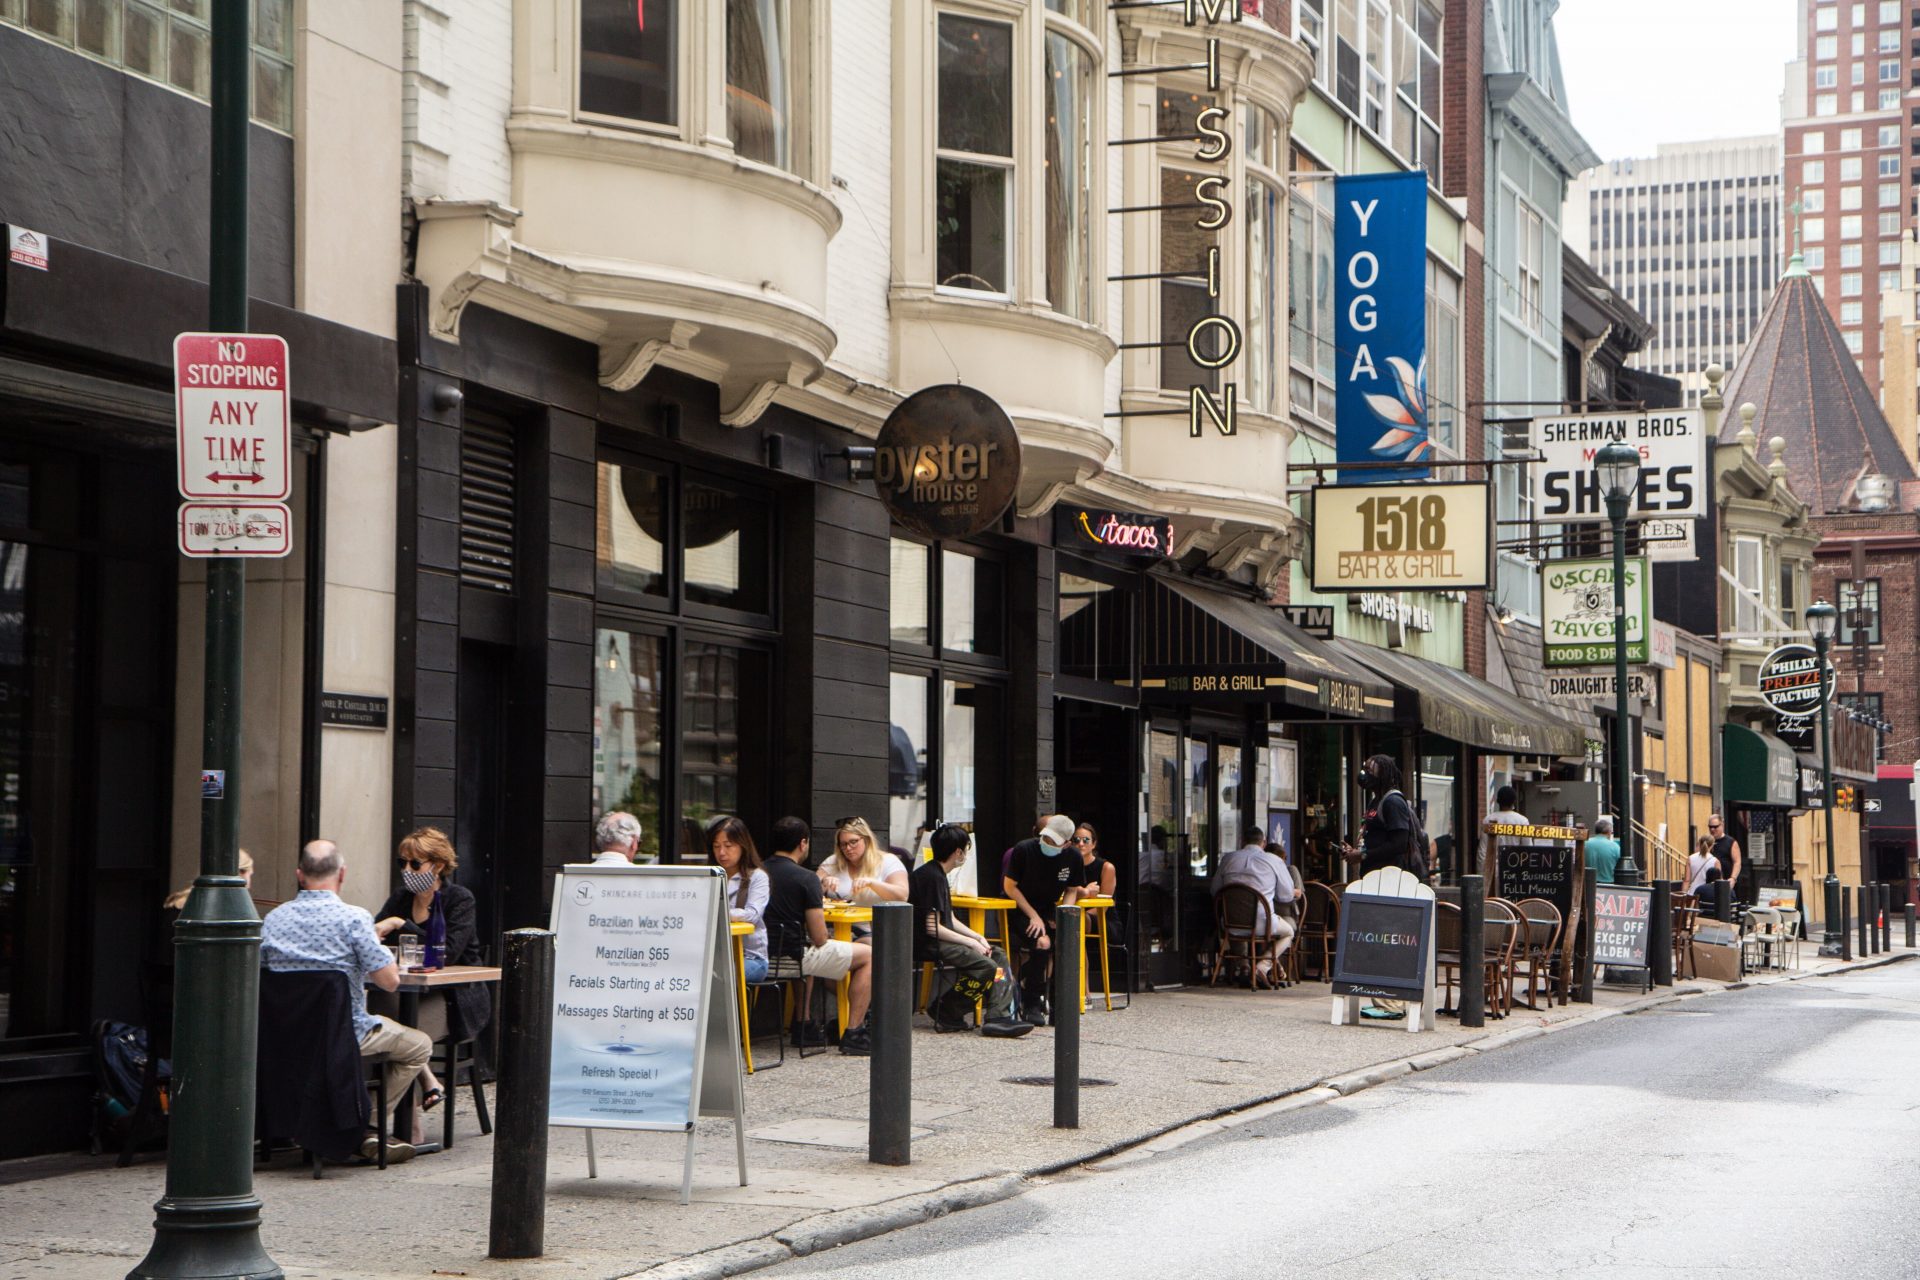 Dining in Philadelphia will remain outdoor seating only for now.